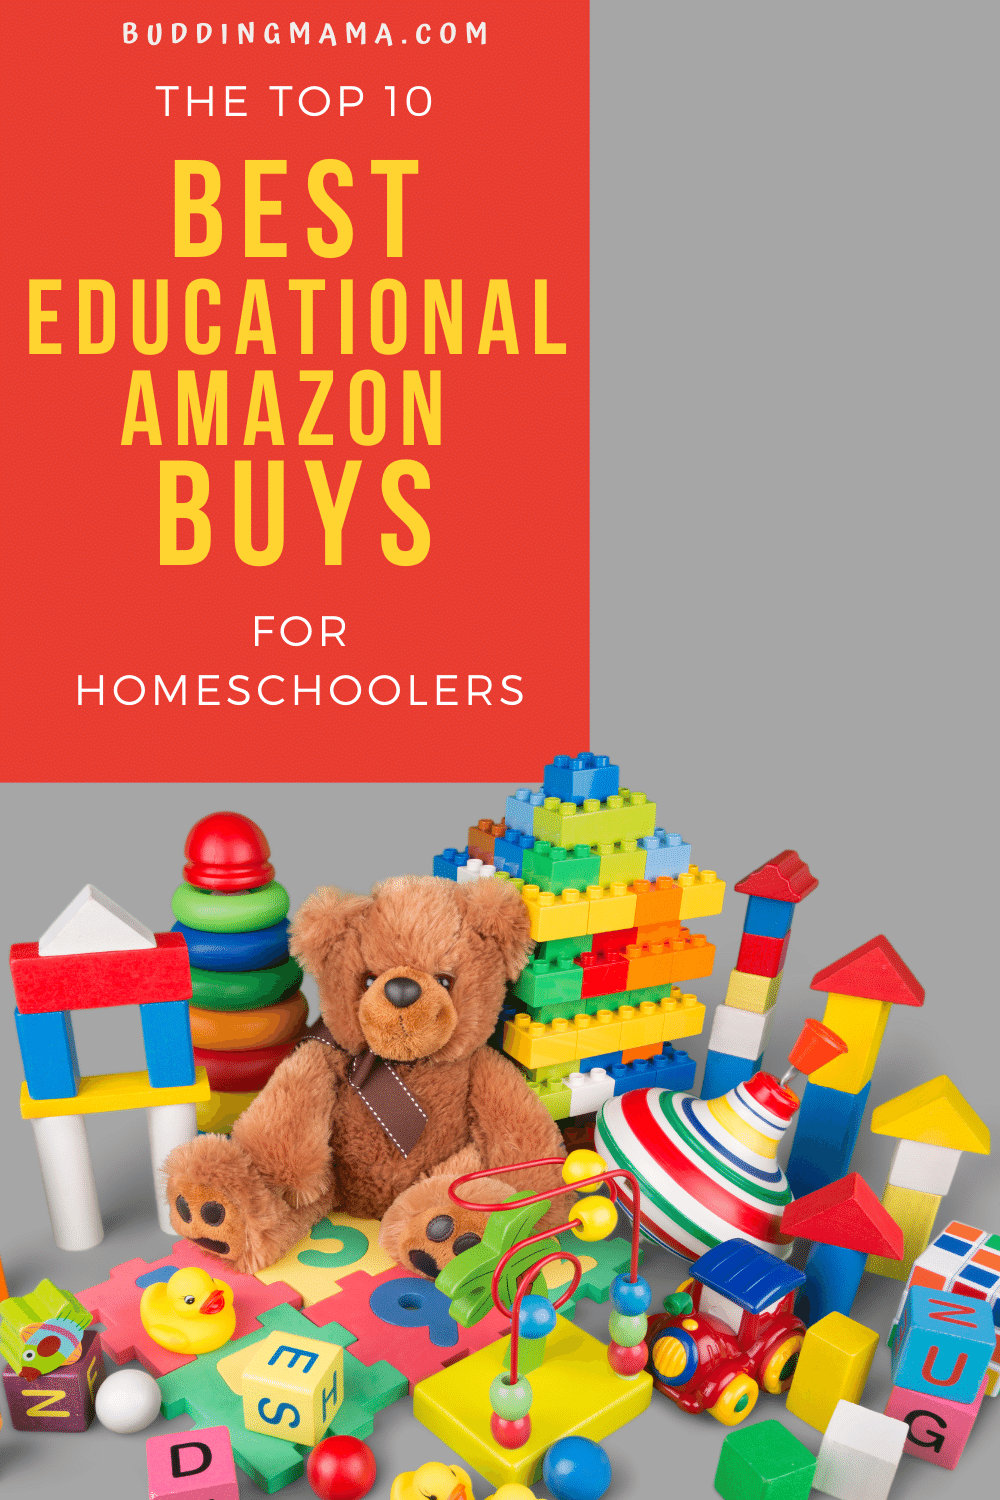 Here are my top 10 picks of the best homeschool buys on amazon. All under $35.